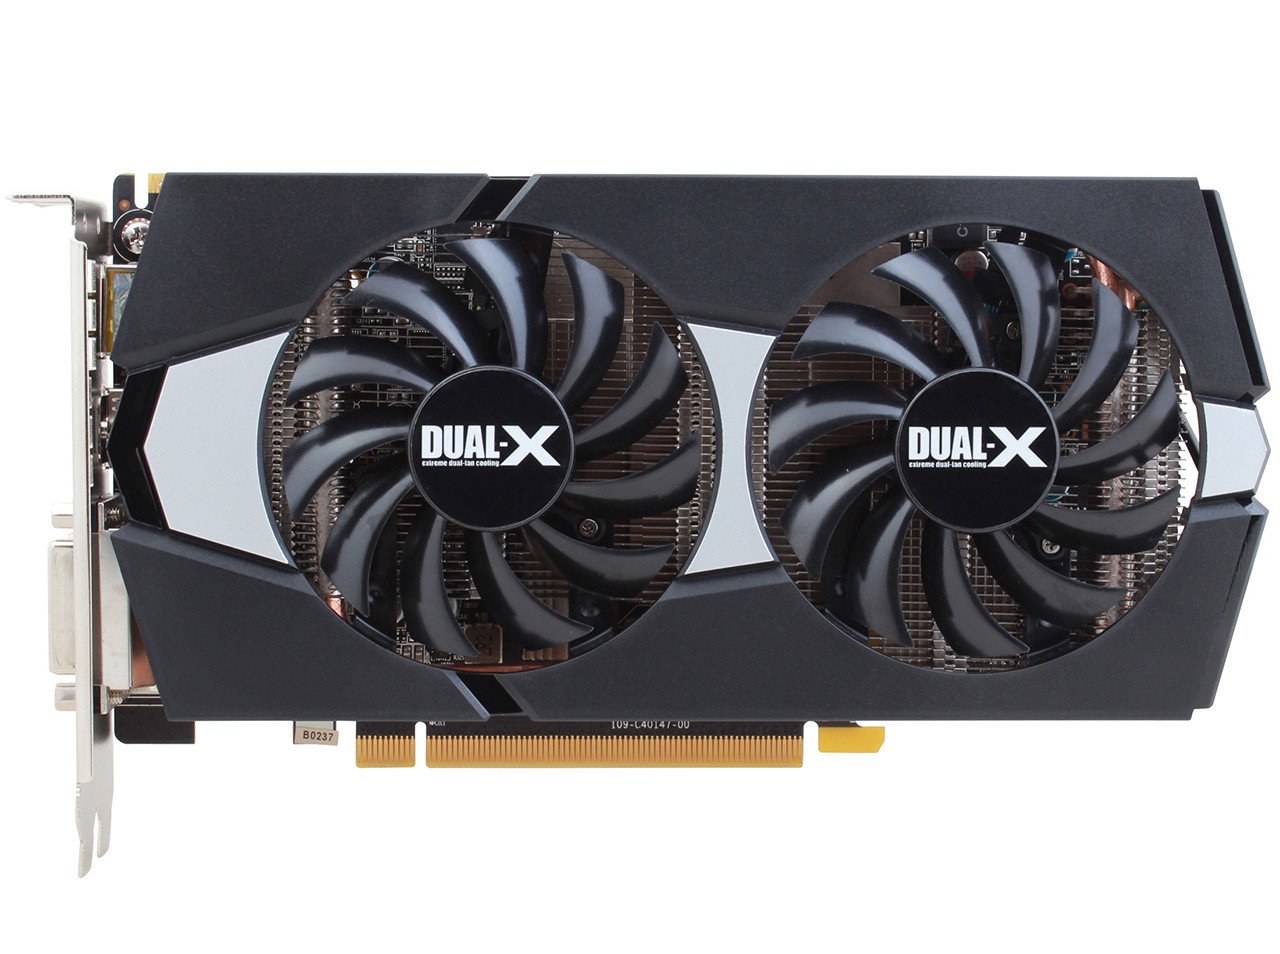 Media asset in full size related to 3dfxzone.it news item entitled as follows: Sapphire introduce la video card Radeon R9 270 Boost OC Edition | Image Name: news20423_Sapphire-Radeon-R9-270-Boost-OC-Edition_2.jpg